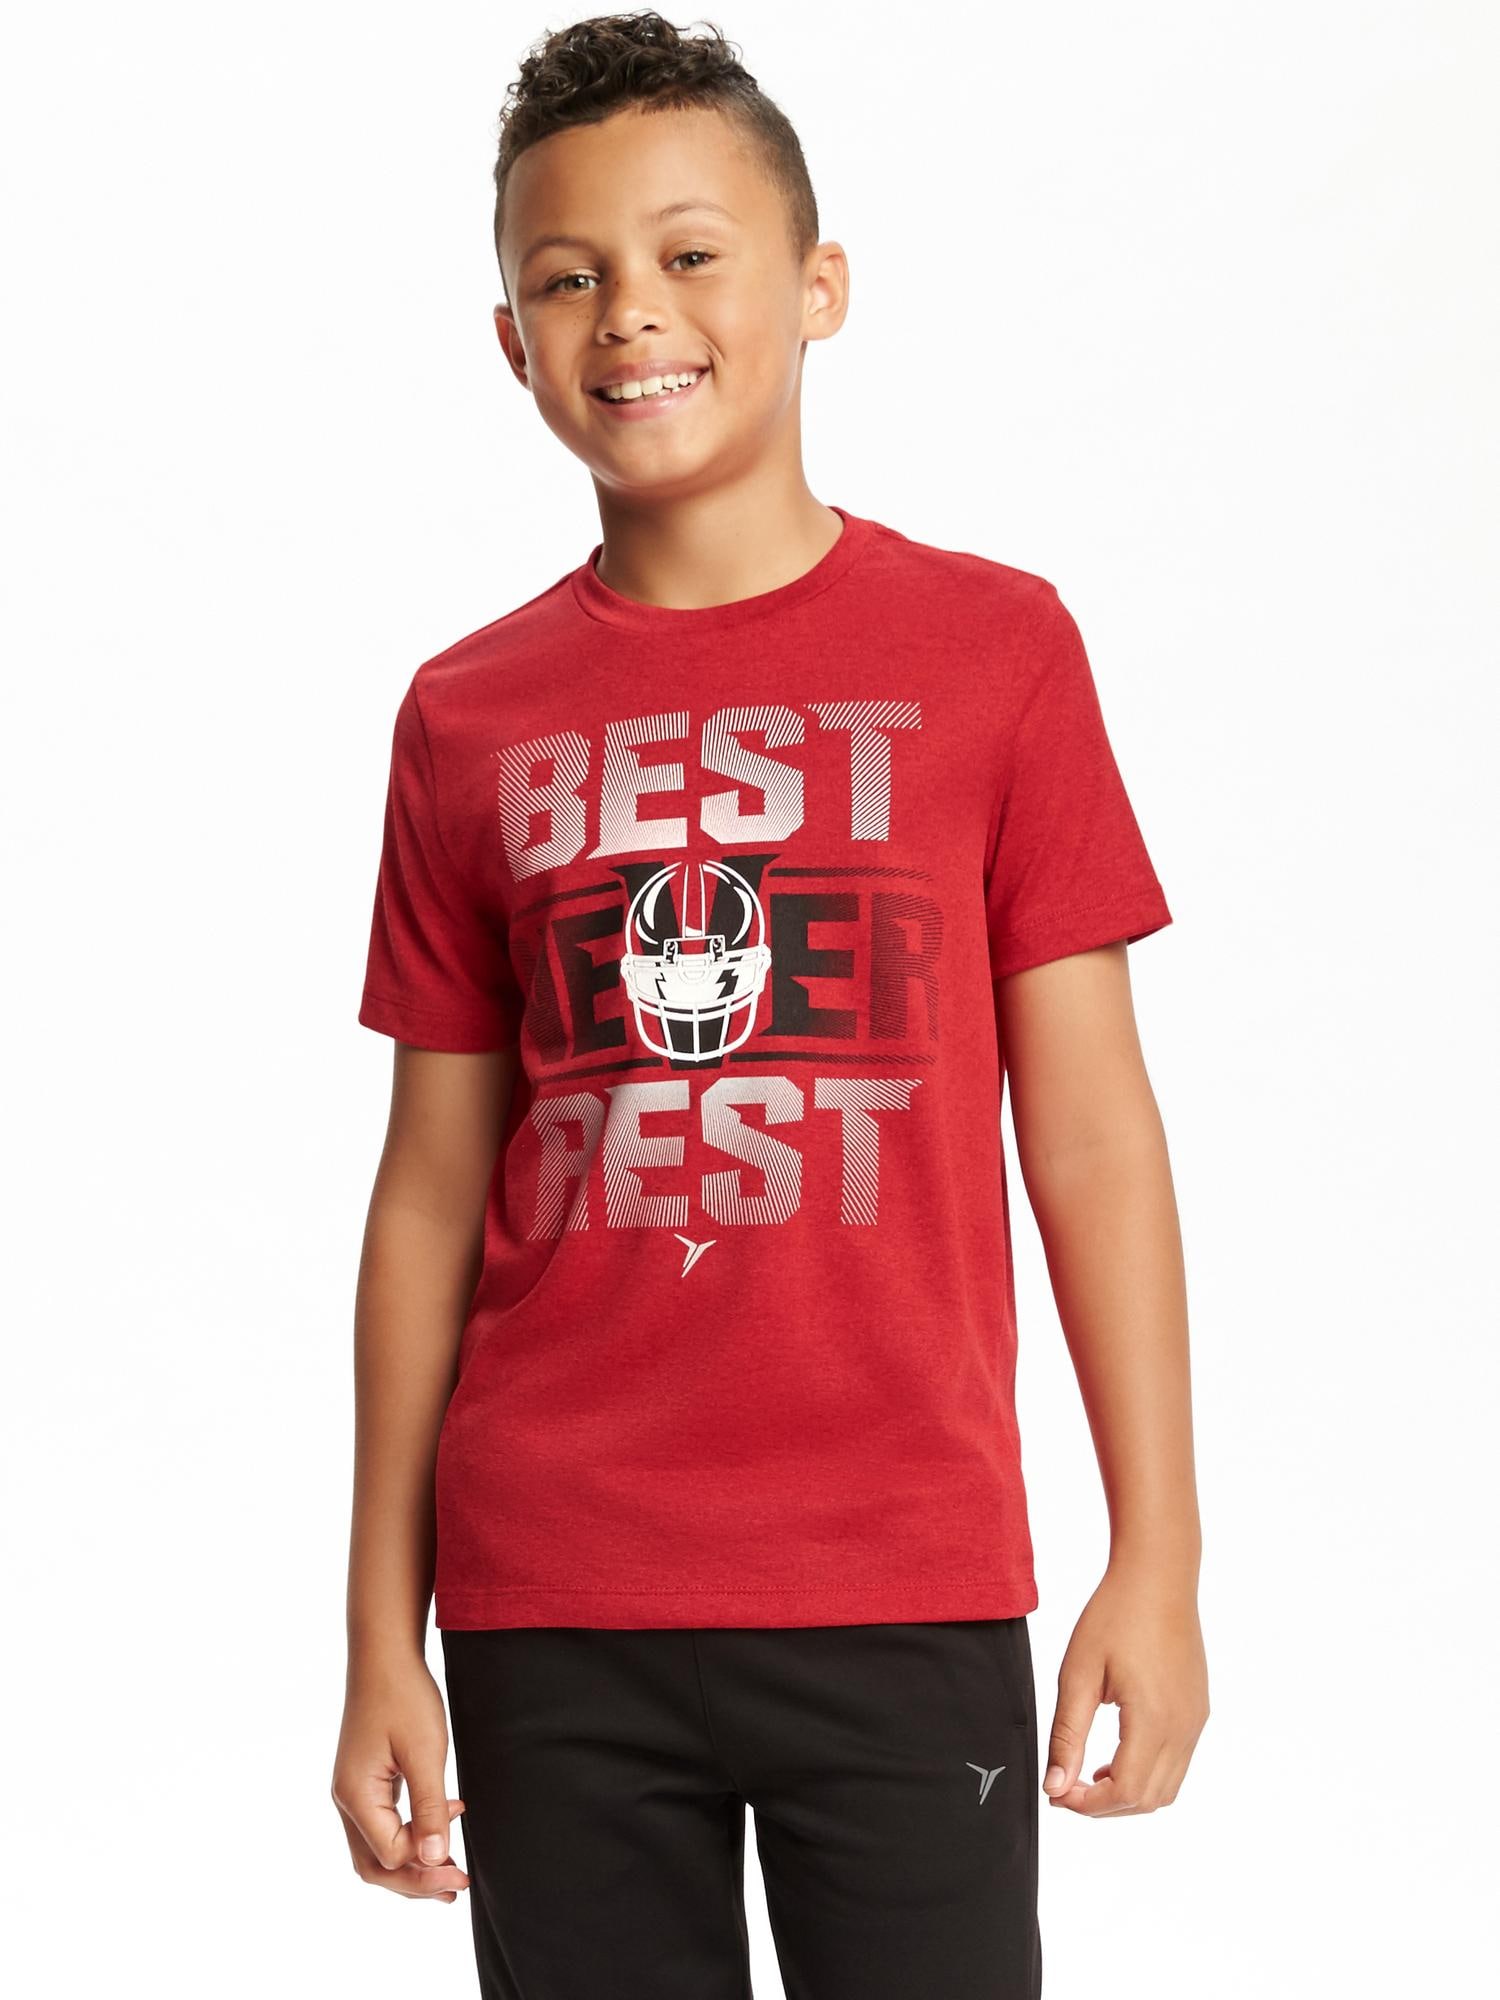 Go-Dry Graphic Tee for Boys | Old Navy